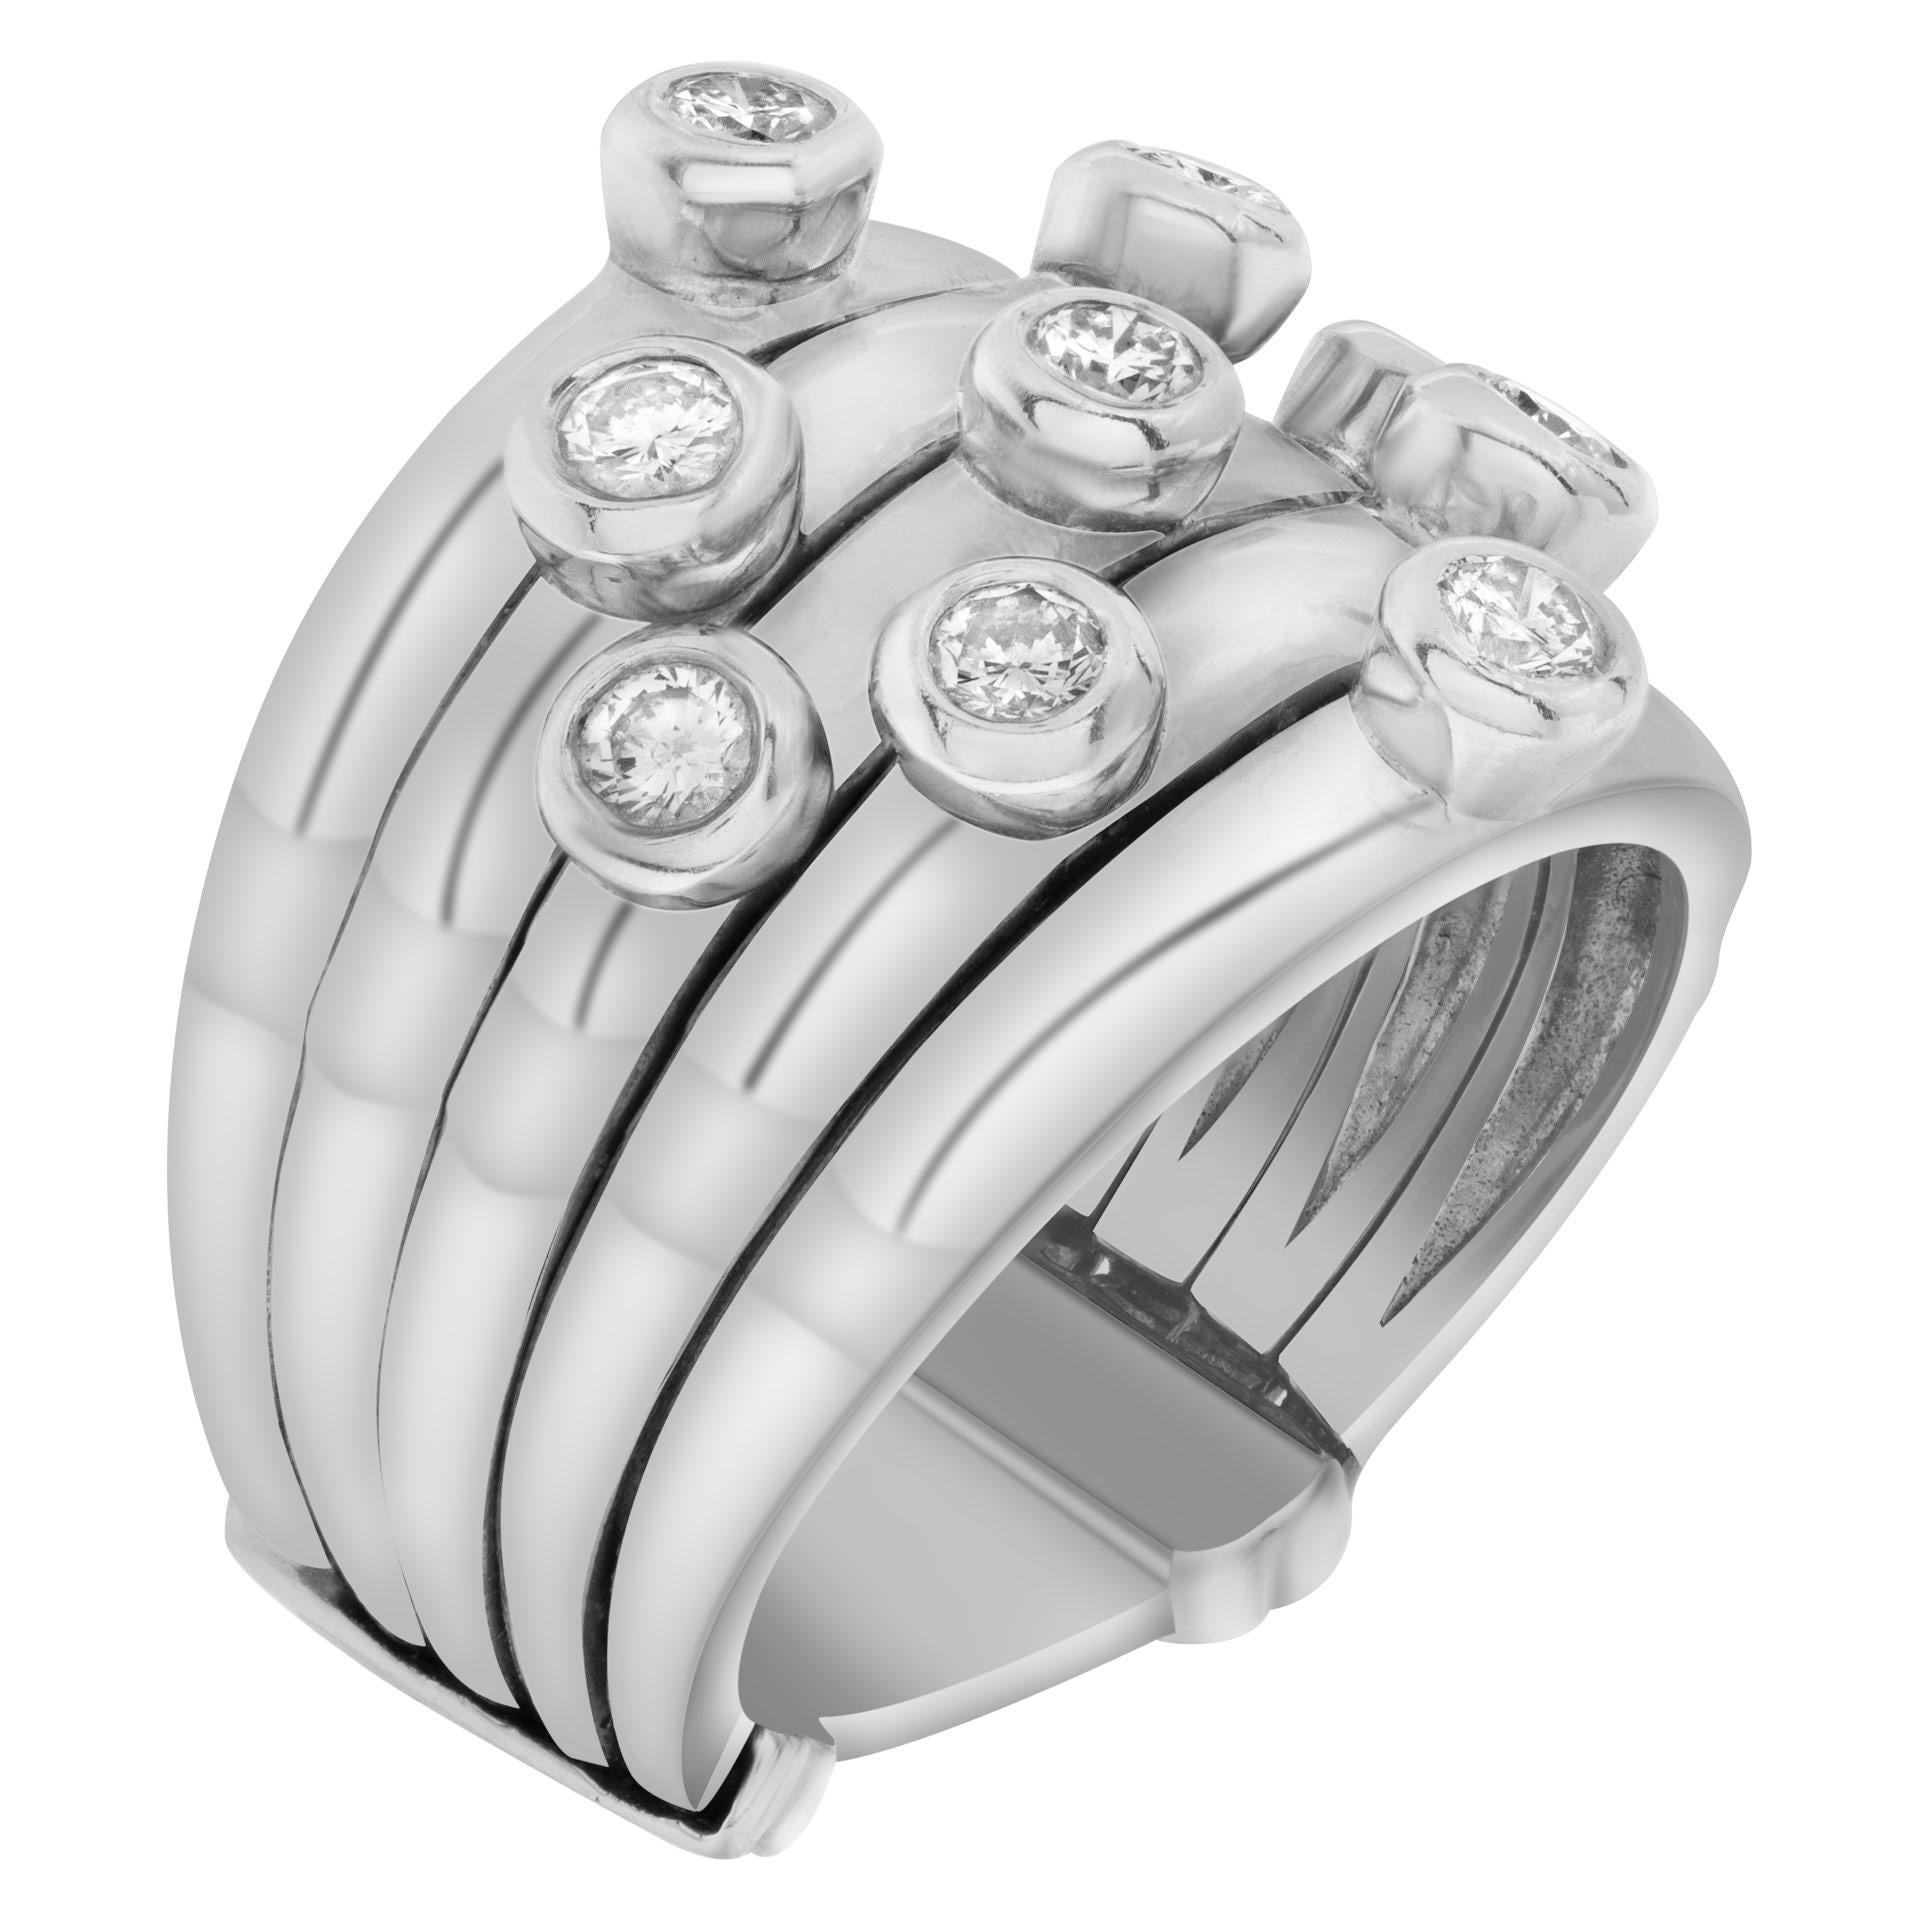 Ring in 18k White Gold with Diamond Accents In Excellent Condition For Sale In Surfside, FL